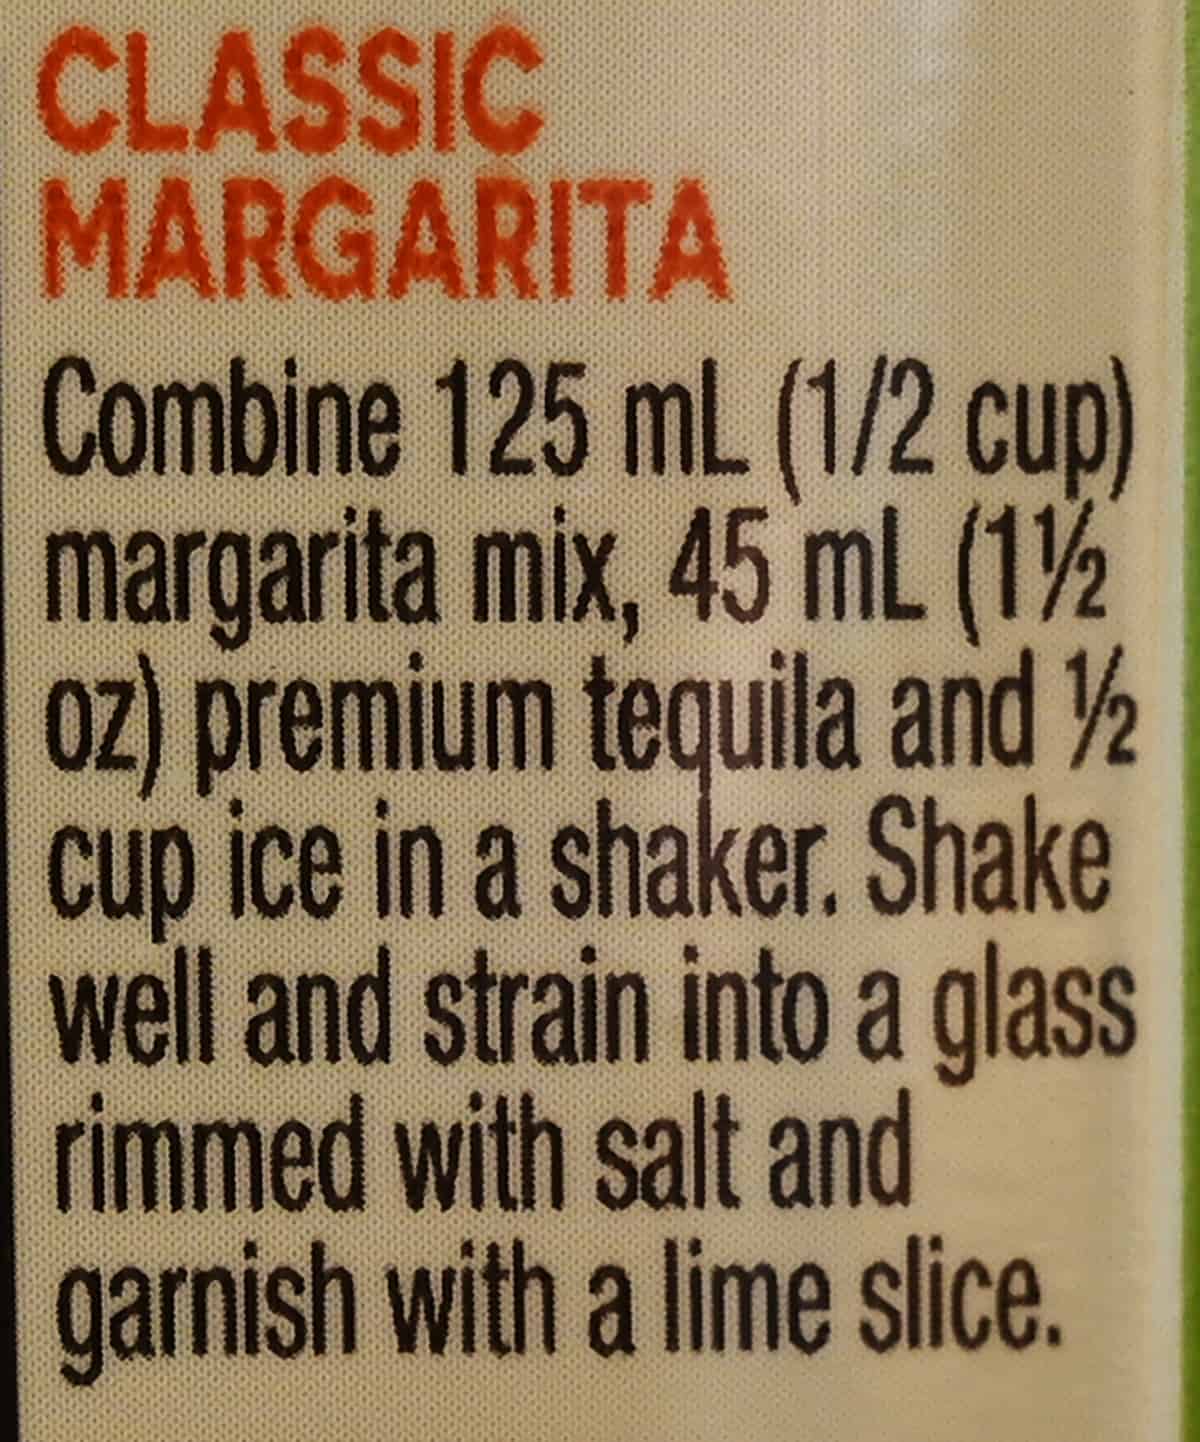 Image of a recipe for a classic margarita from the back of the bottle of mix.